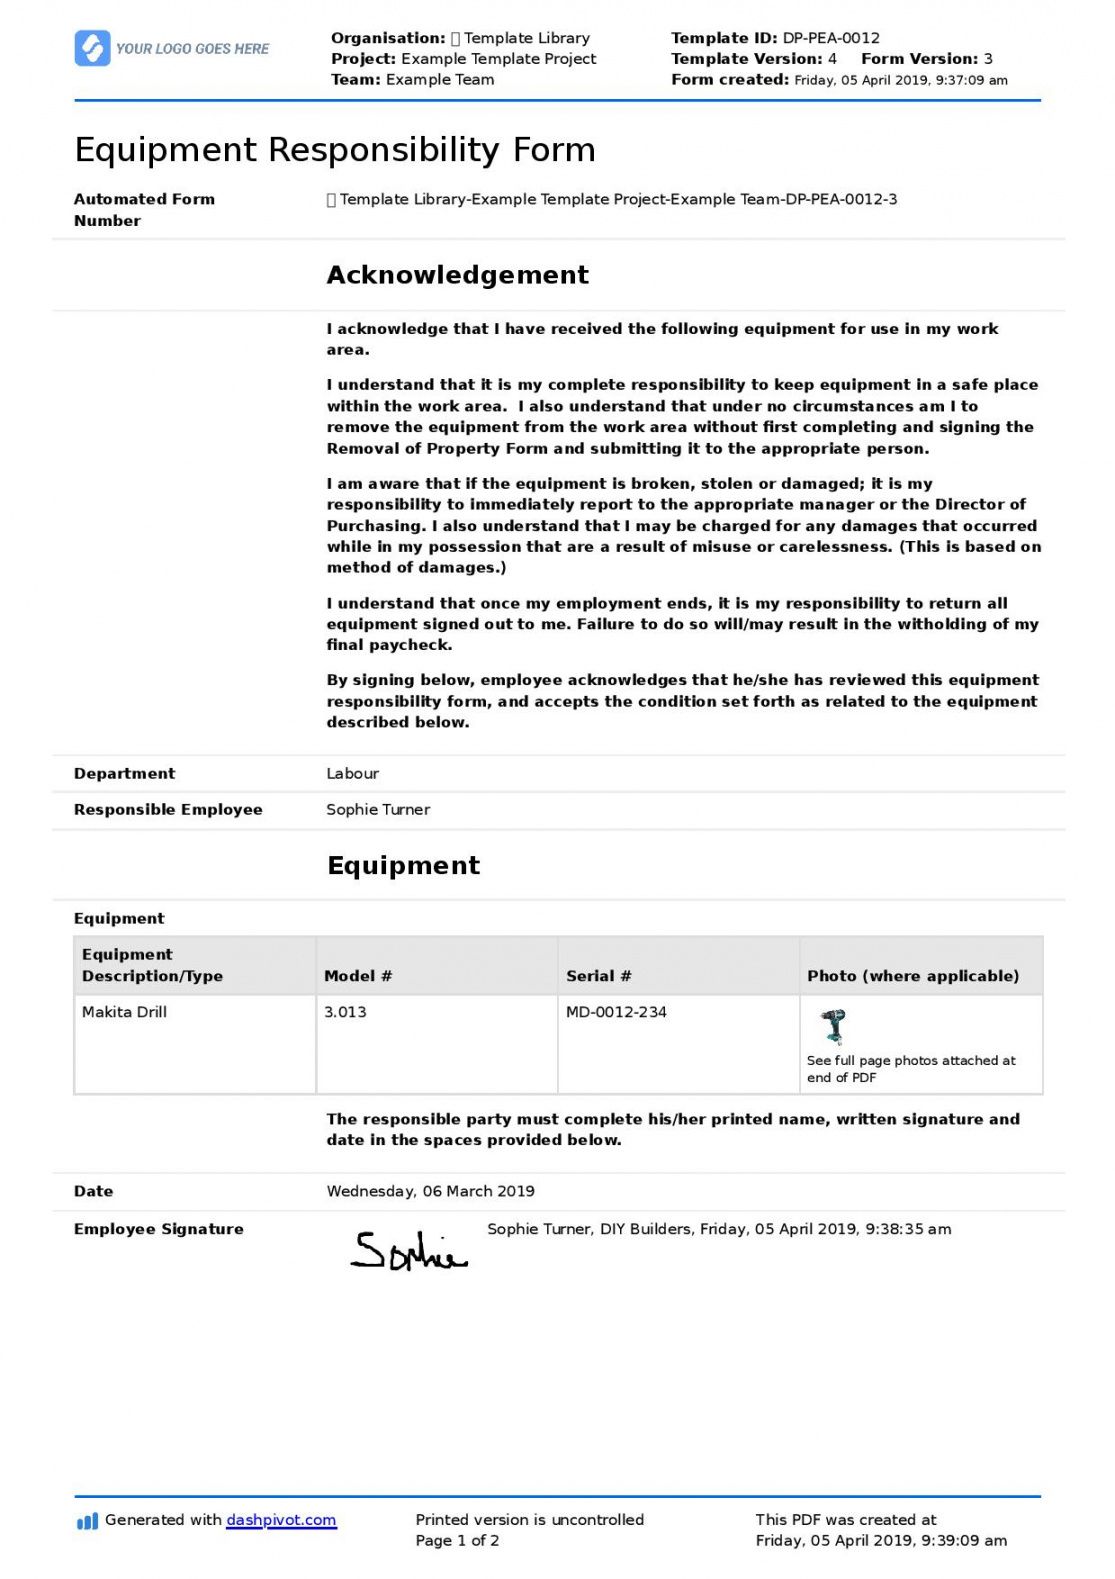 free employee equipment responsibility form free and editable asset management agreement template excel